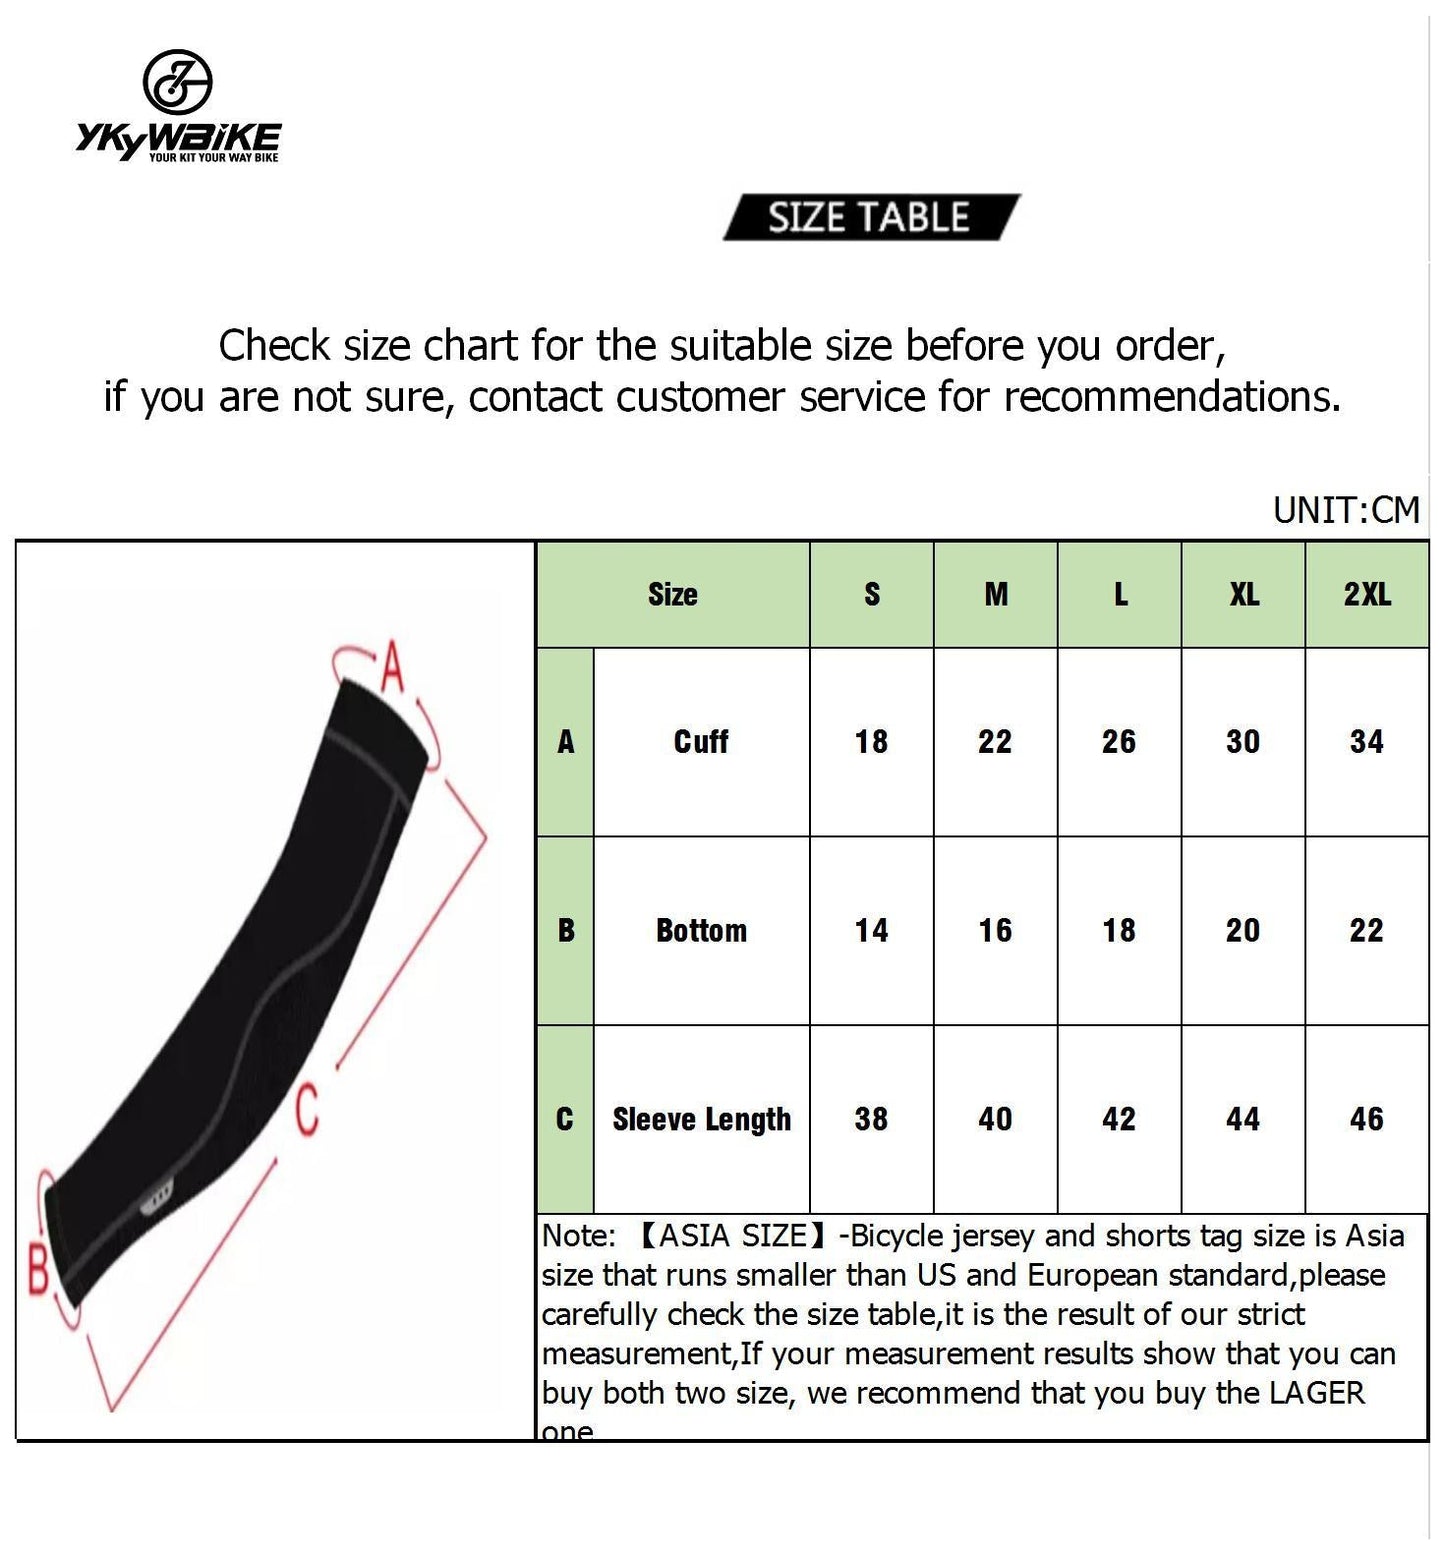 YKYW Cycling Pro Team Sports Arm Sleeve Winter 10-20°C Thermal Fleece Keep Warm High-elastic Anti-friction Anti-skid 5 Colors